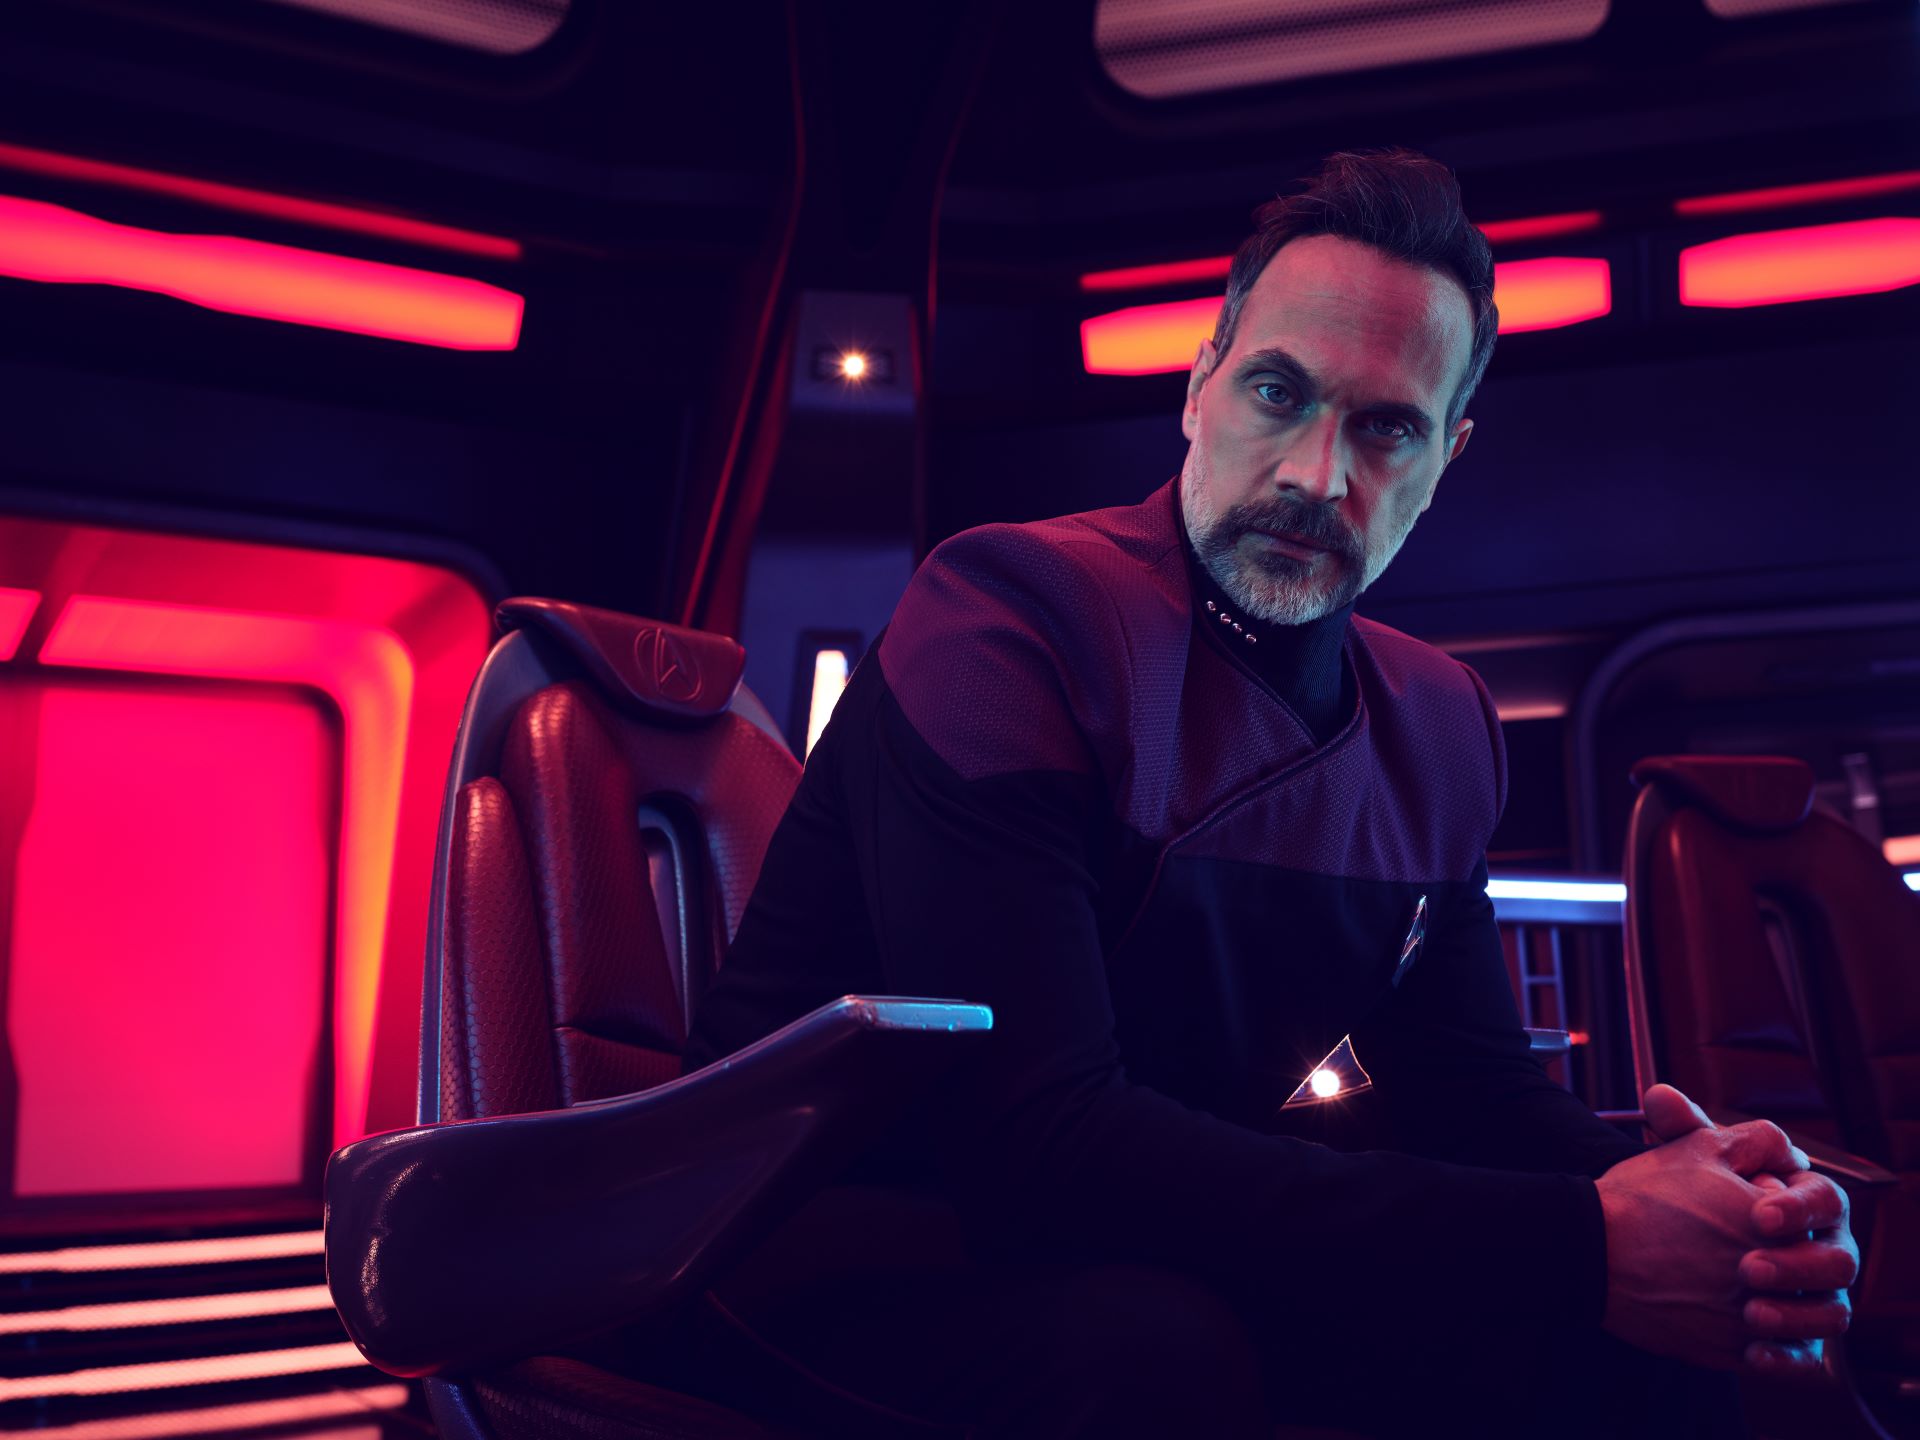 Captain Liam Shaw, played by Todd Stashwick, is one of the season's new characters.